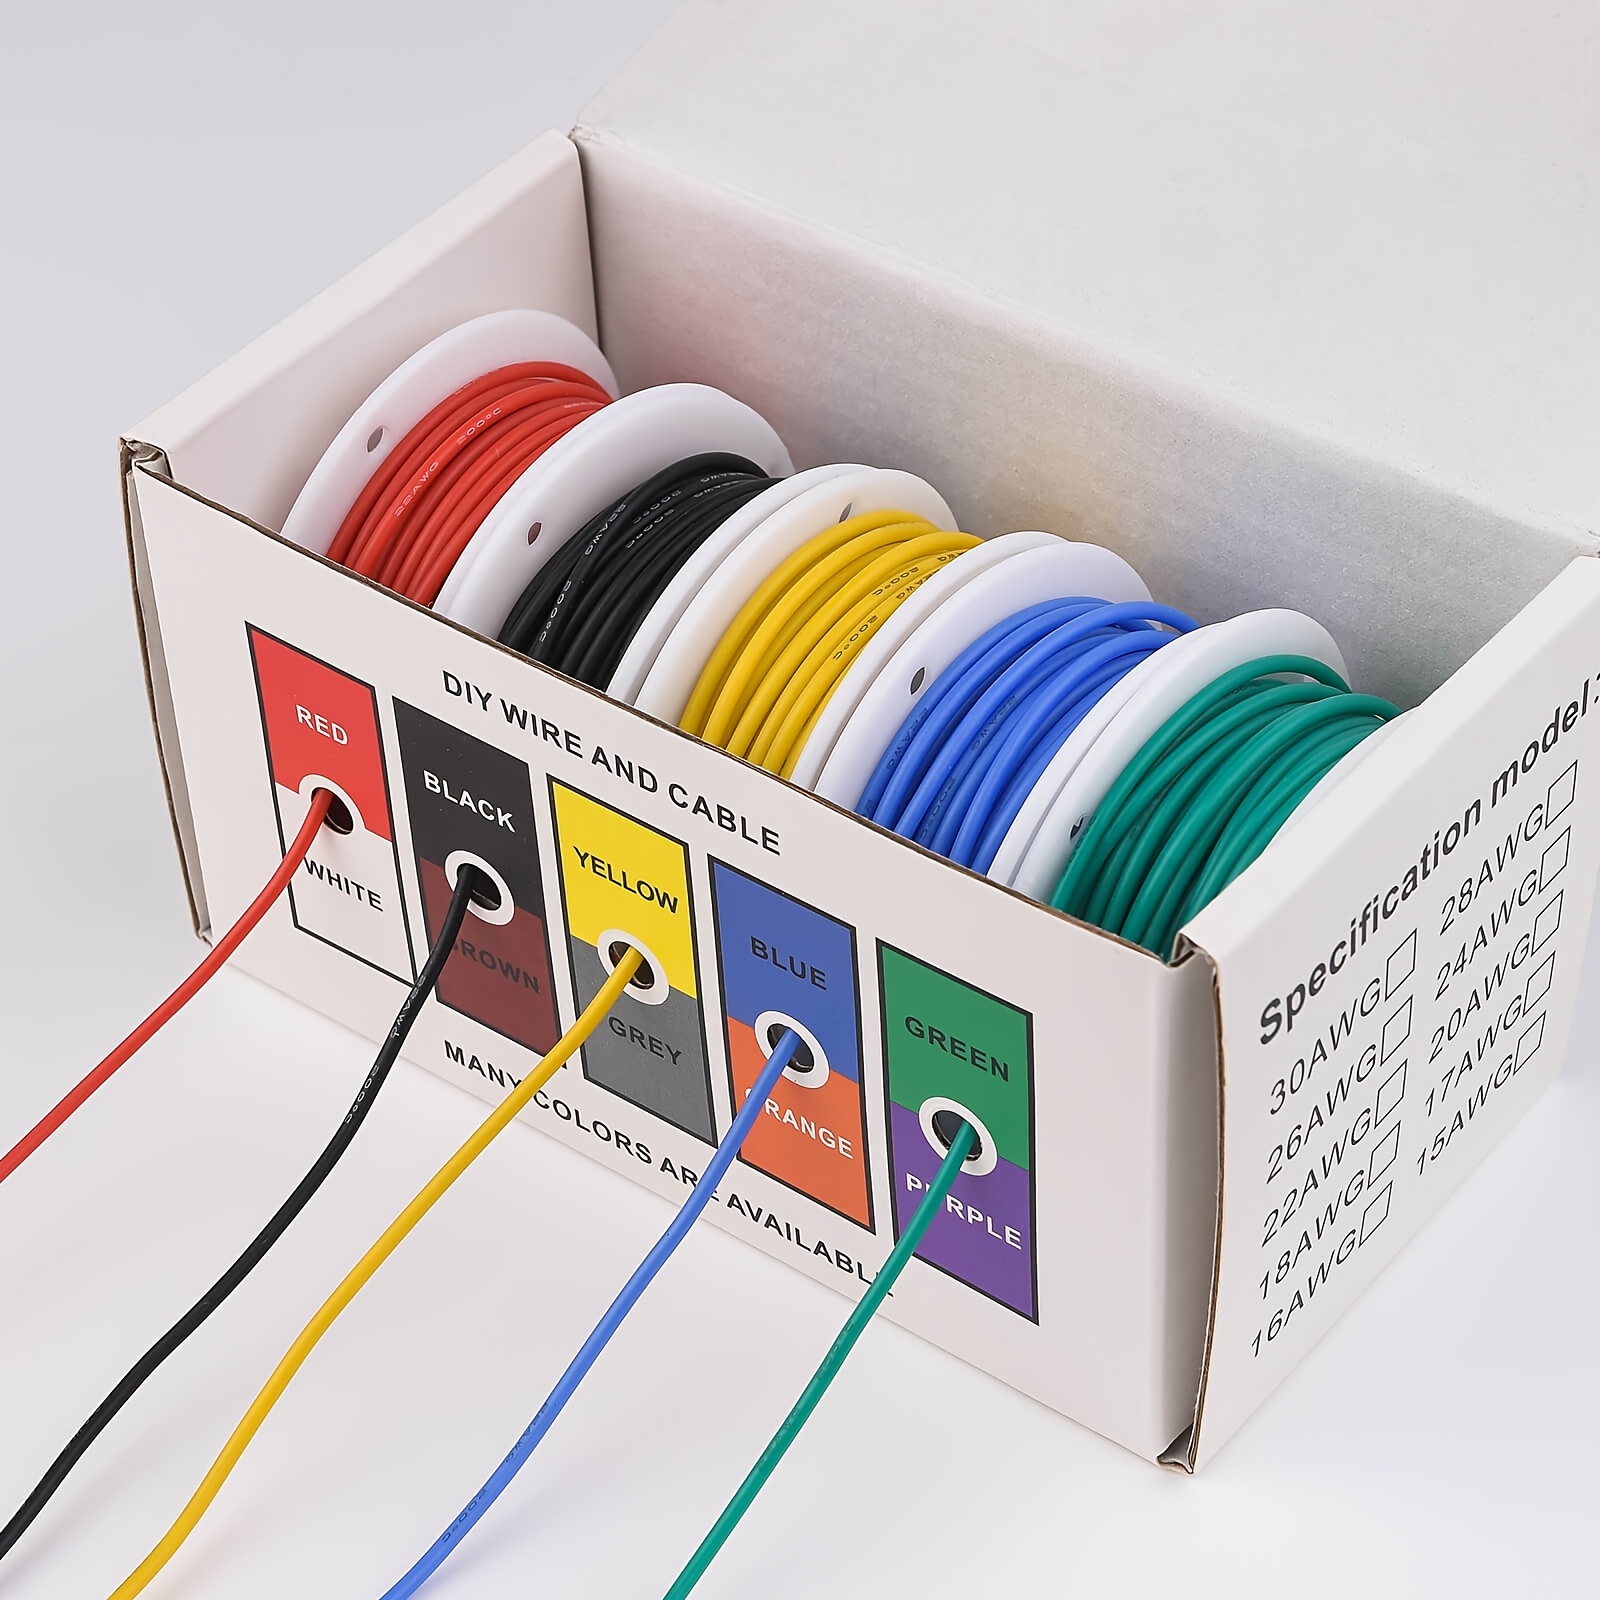 1 Set 22 AWG Stranded Electrical Wire 22 Gauge Tinned Copper Wires Flexible  Silicone Electric Hookup Wire Kit OD:1.7mm, 5 Colors 16.4ft And 32.8ft Eac